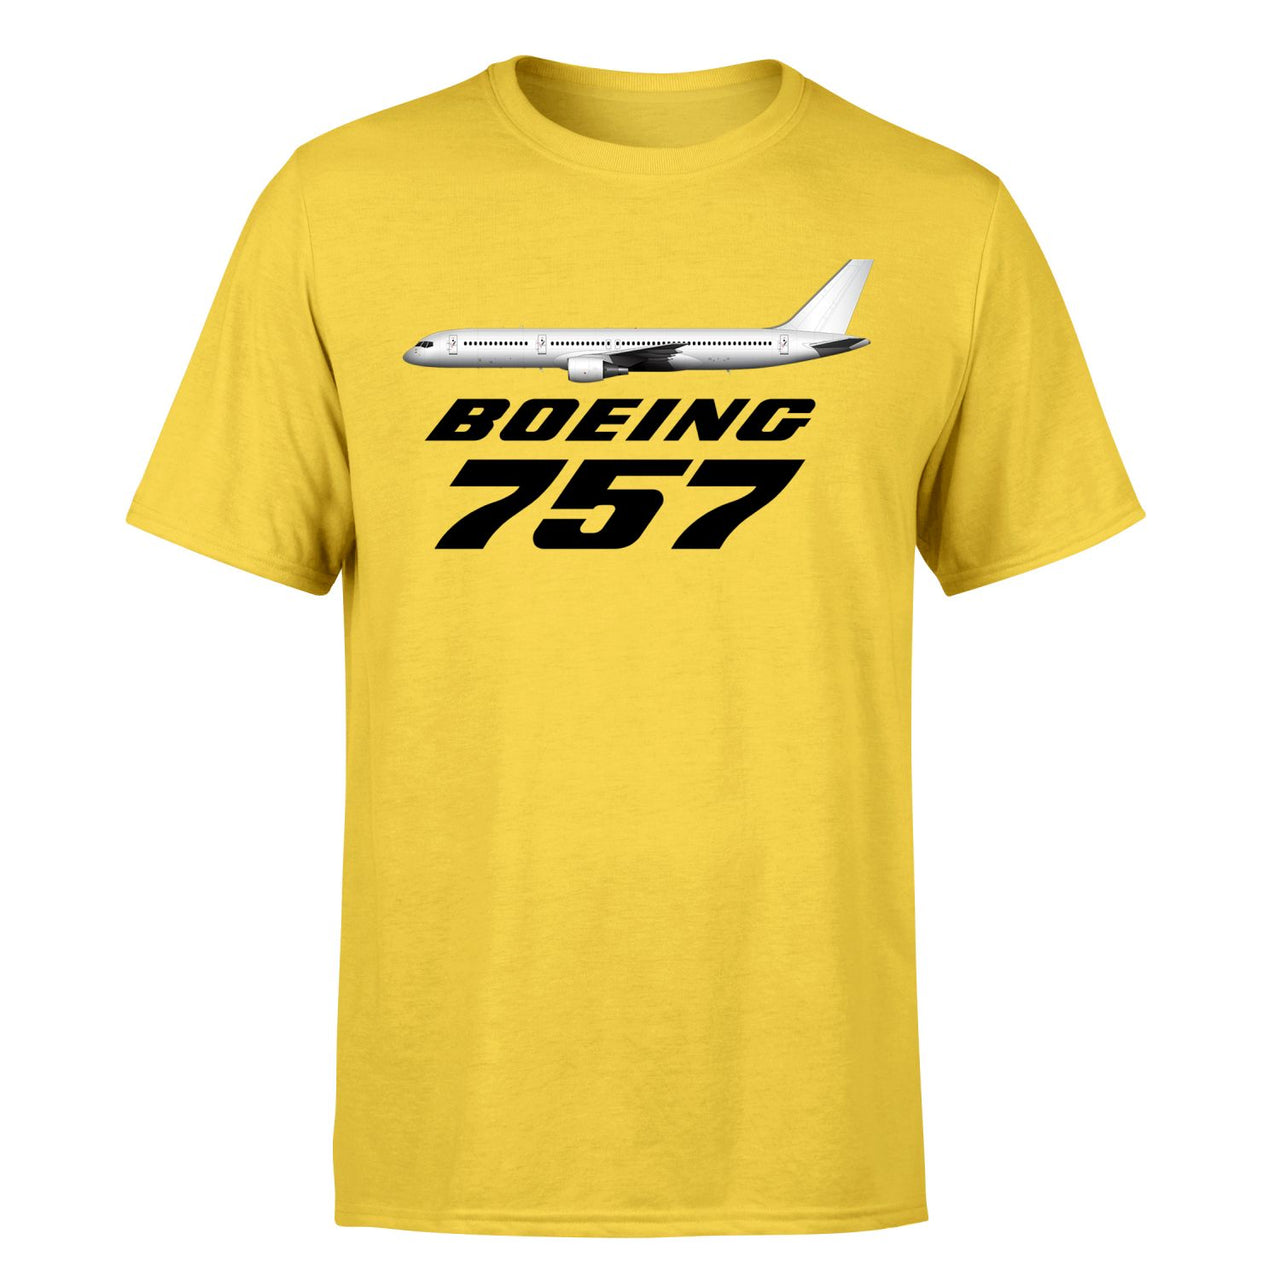 The Boeing 757 Designed T-Shirts